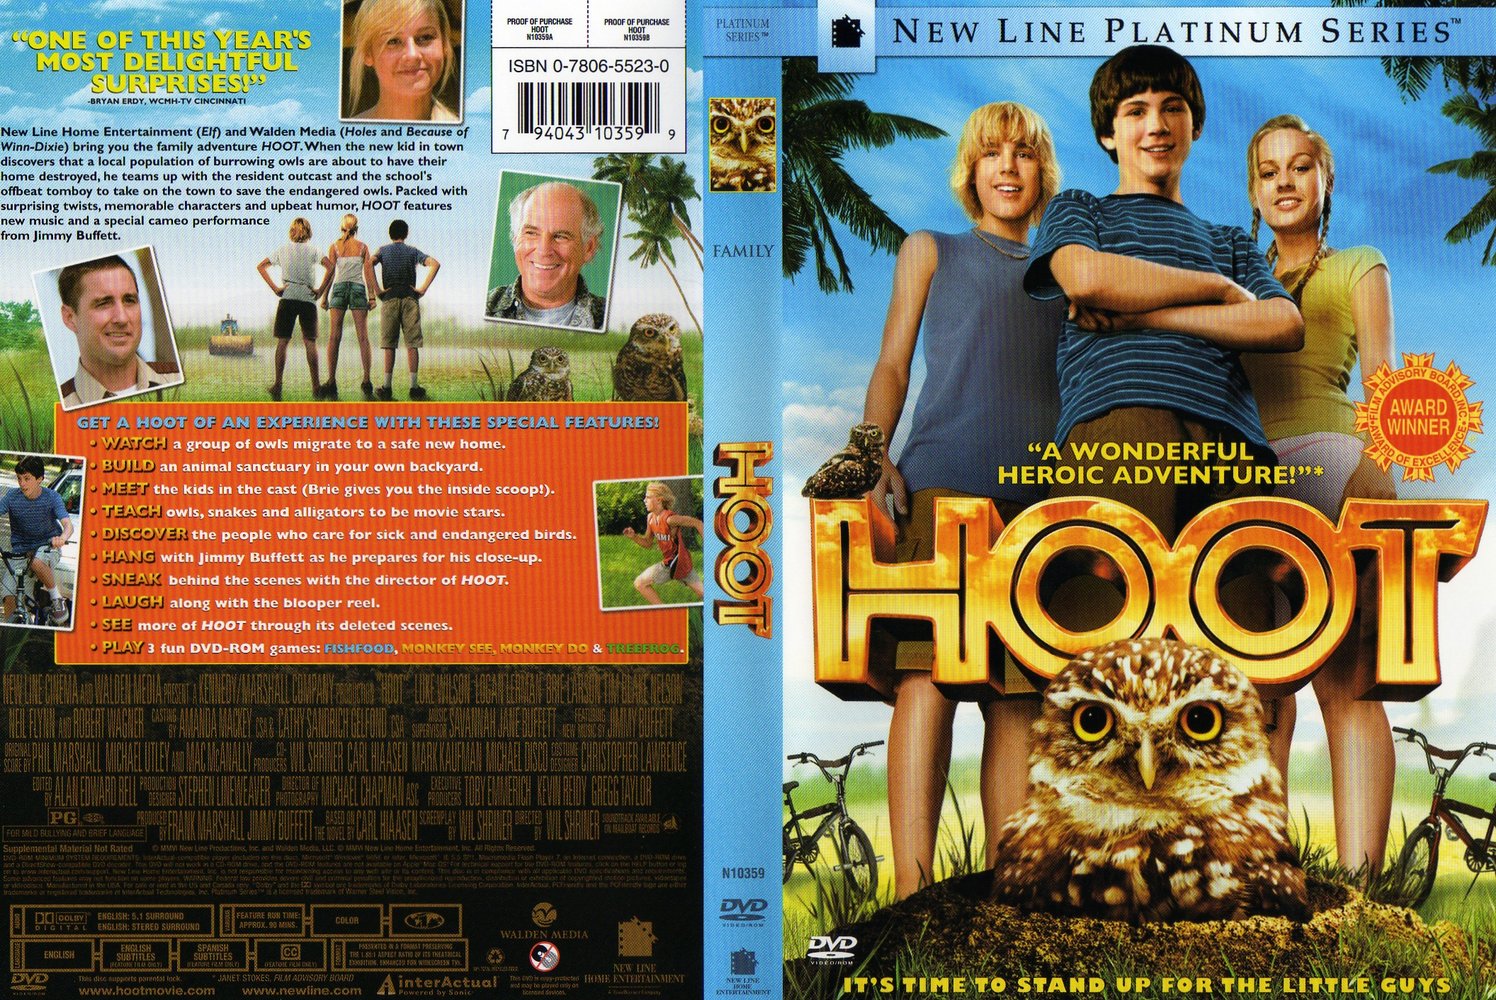 Jaquette DVD Hoot Zone 1